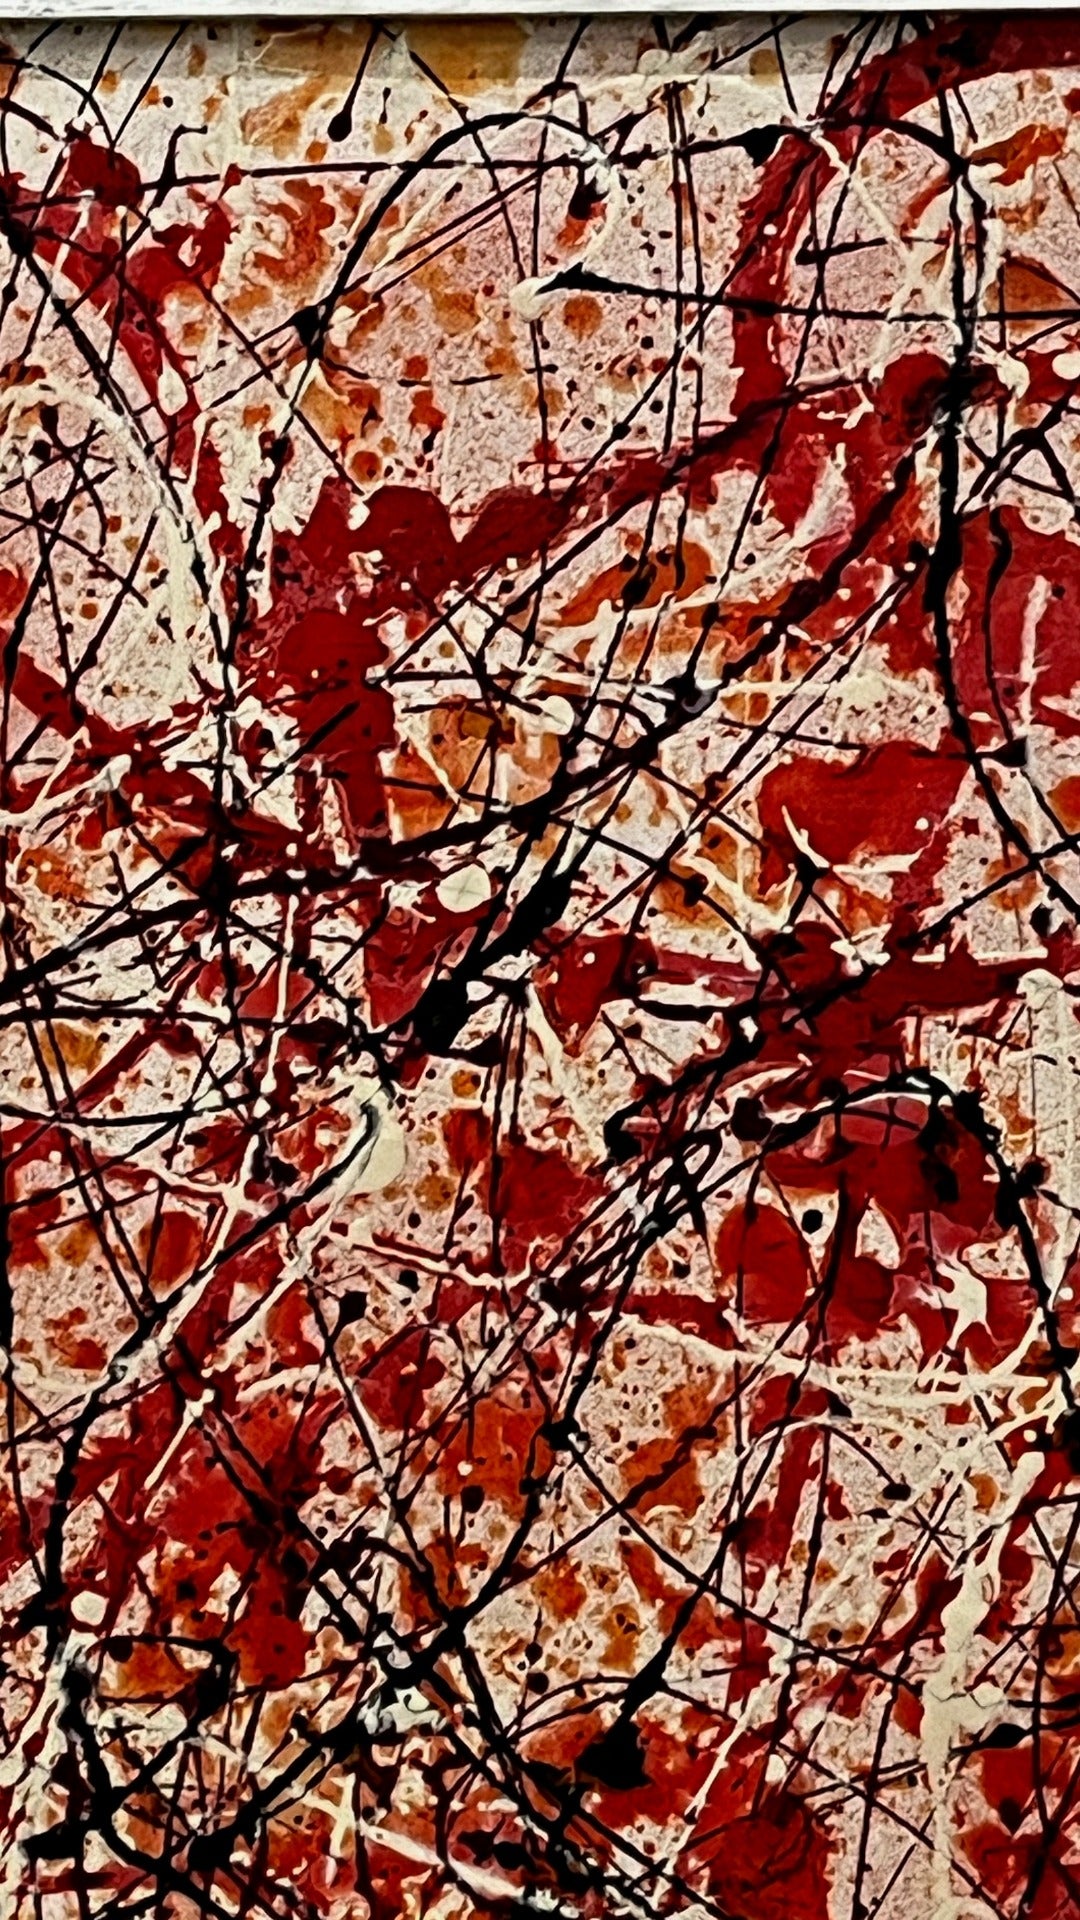 MIX RED ABSTRACT PAINTING